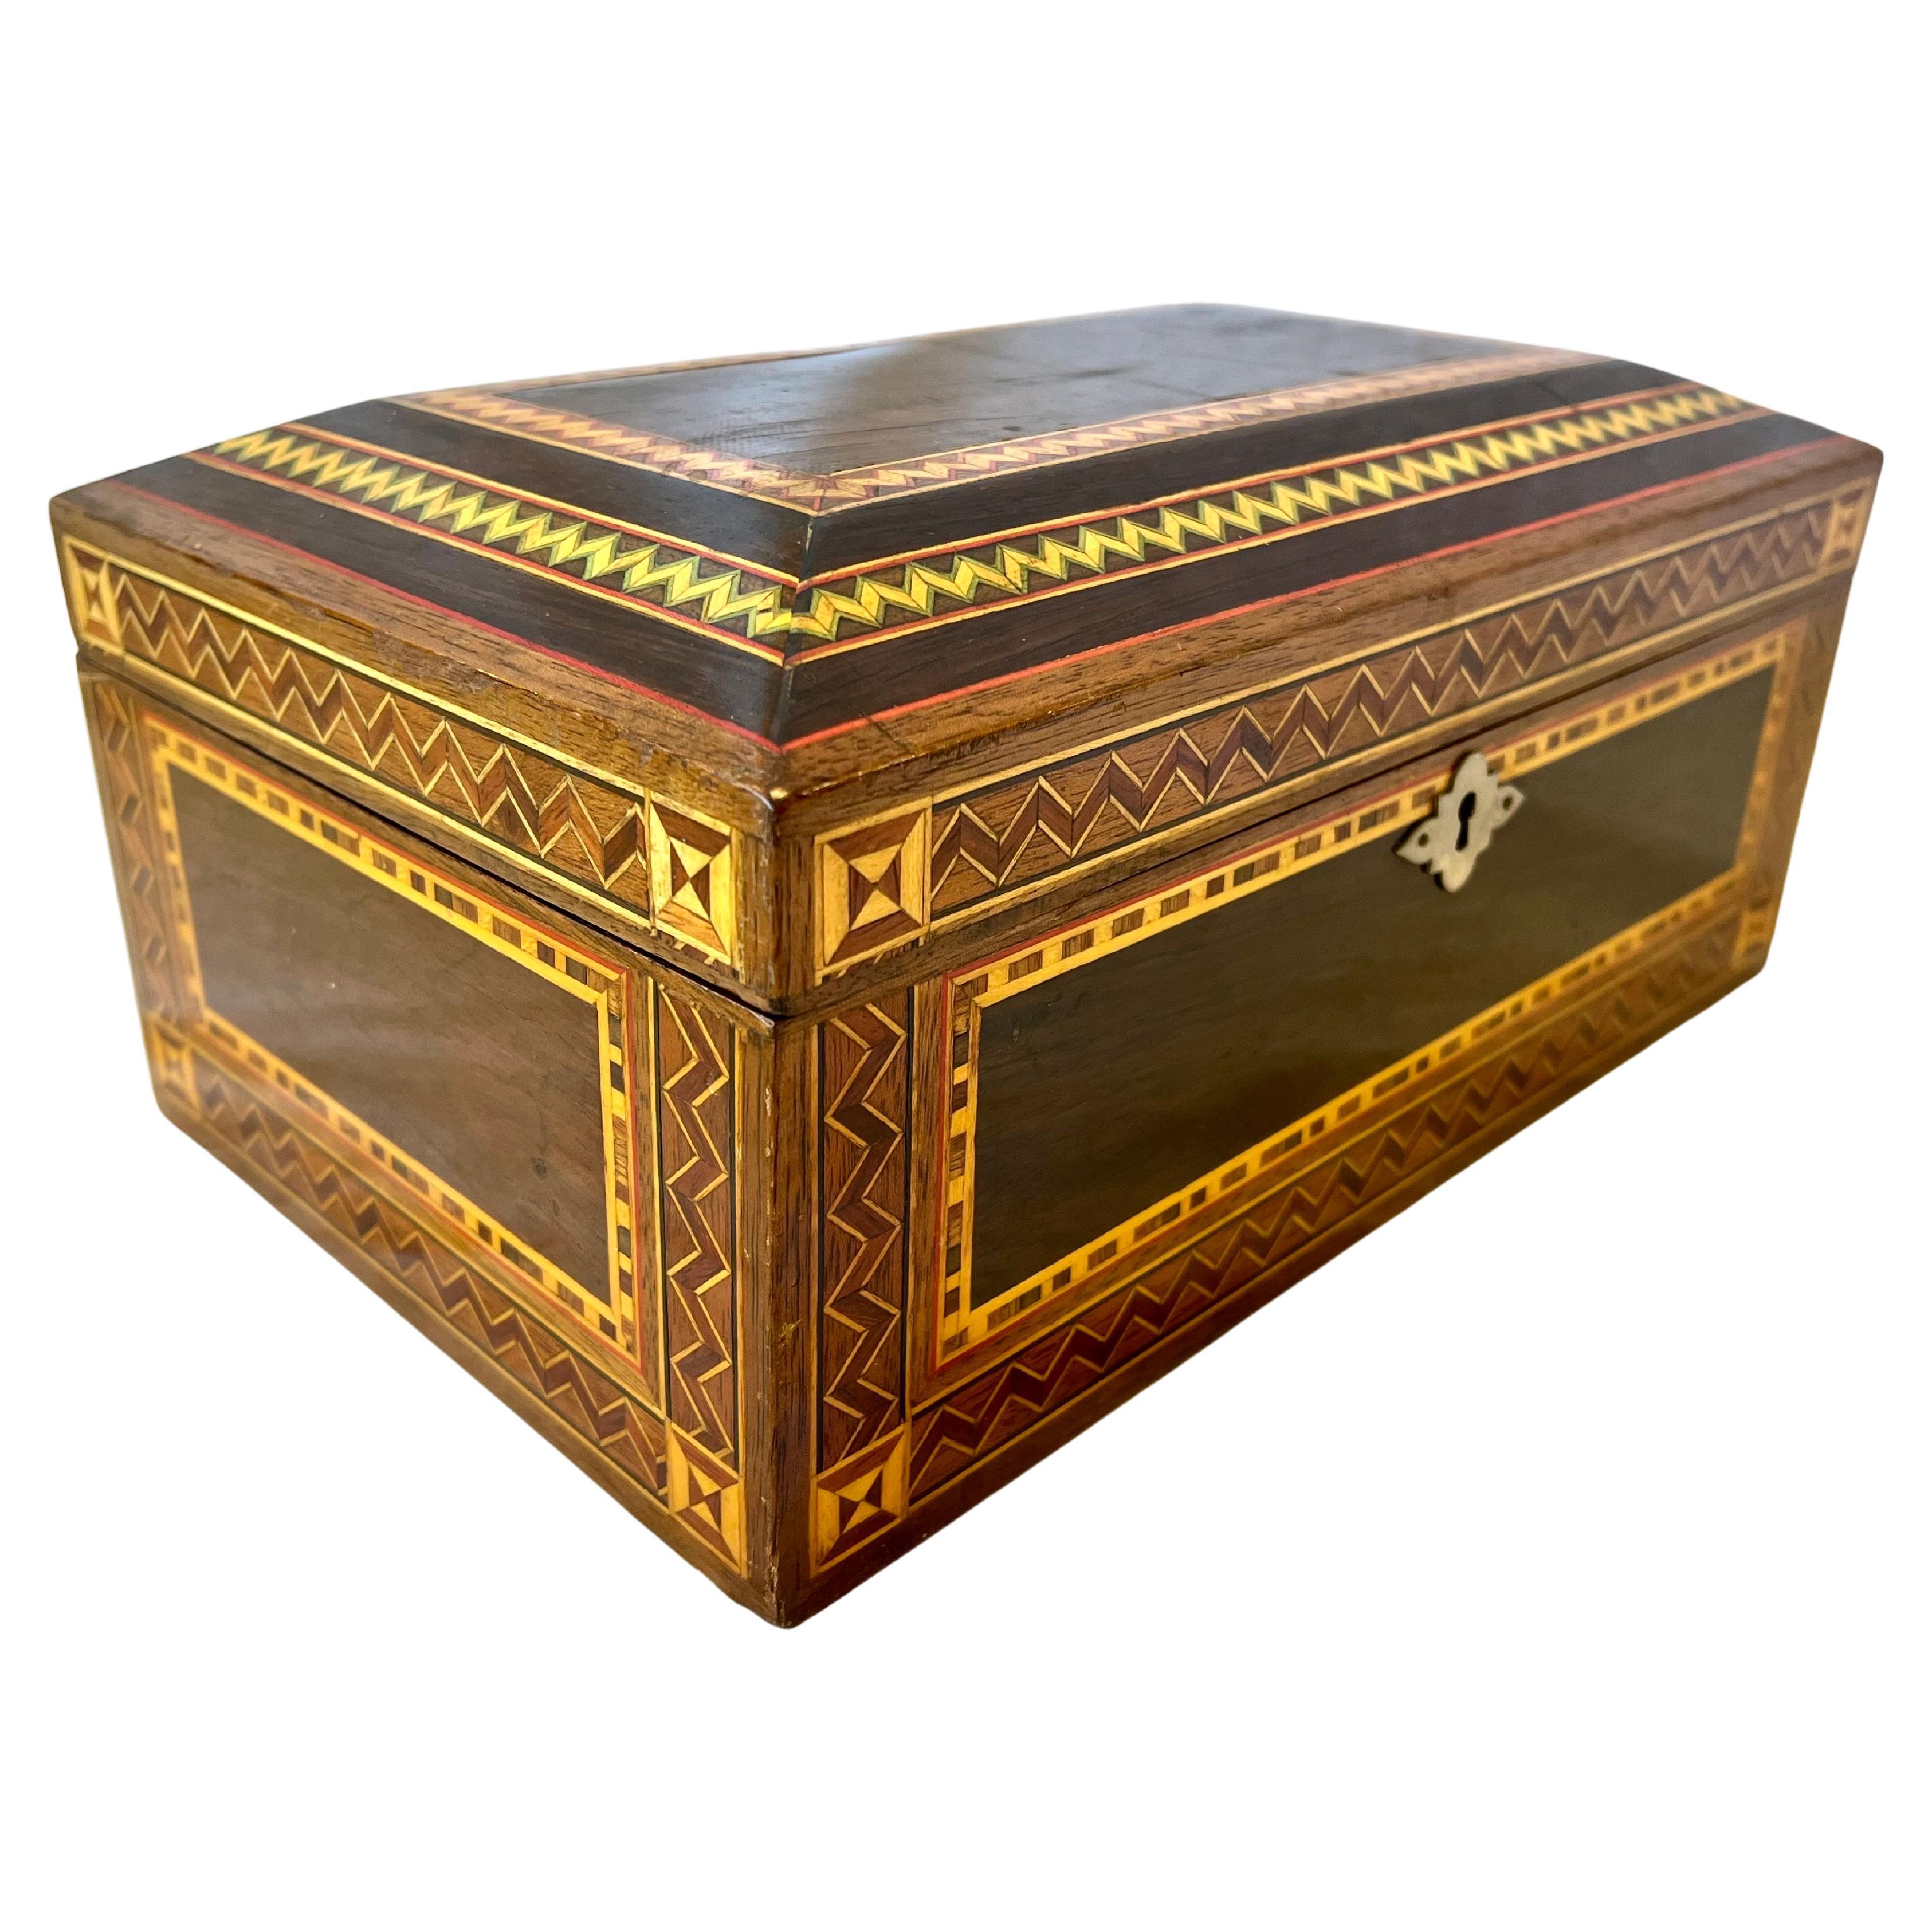 Vintage Marquetry Wood Inlaid Jewelry Casket Box with Mirror and Velvet Interior